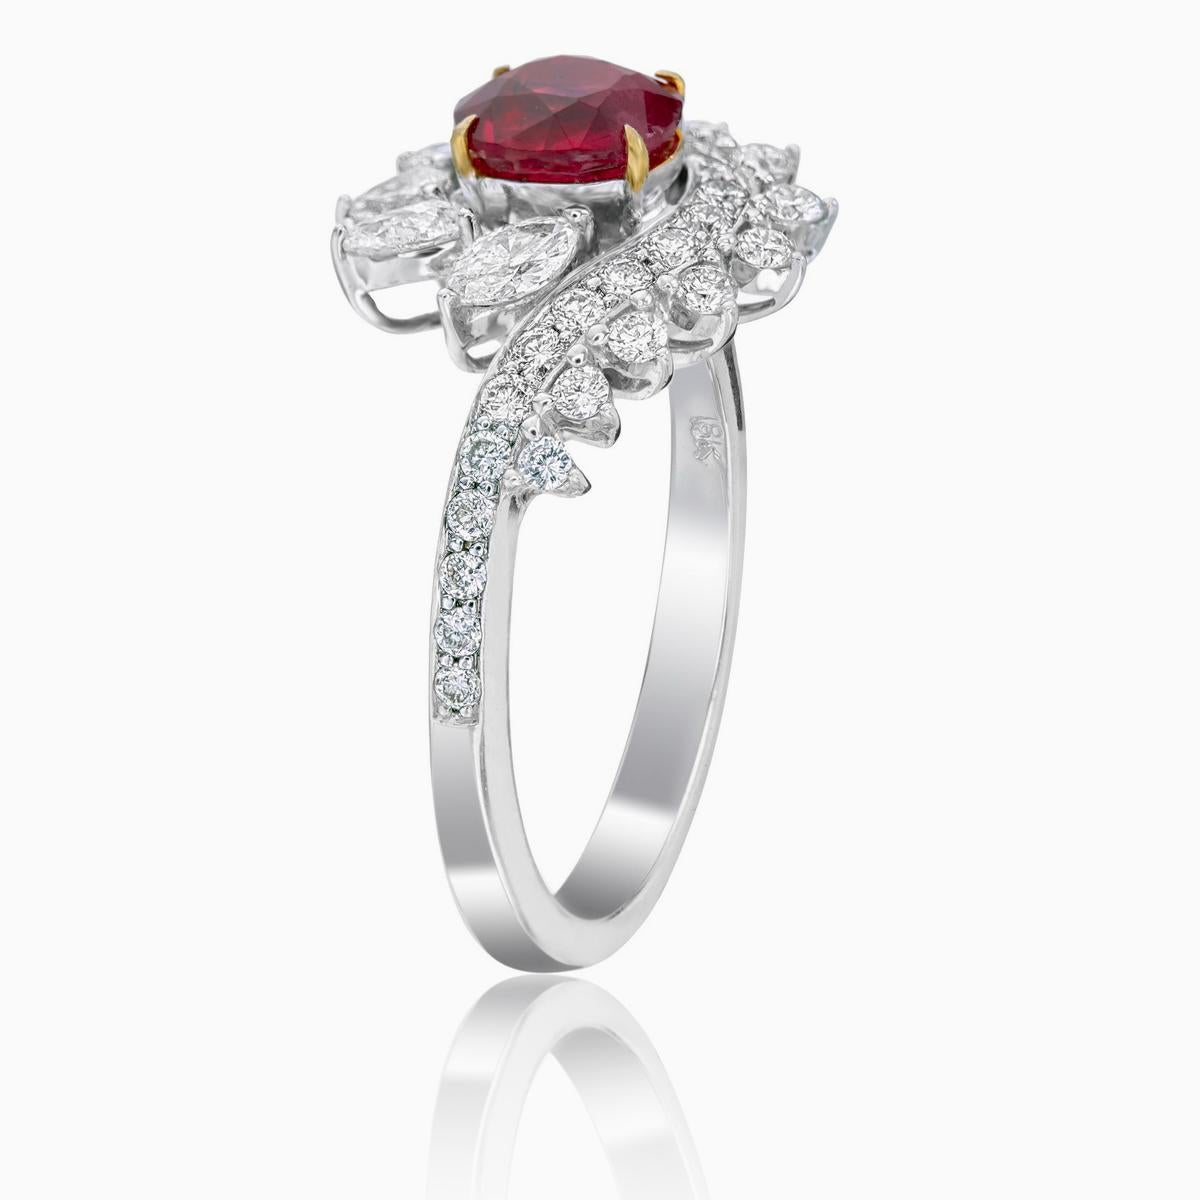 

A ‘Pigeon Blood’ red ruby and diamond solitare ring made in 18 Karat gold. This ring embraces minimalism with its simple design and its color pallete of red and white.

    The center stone is a cushion shaped 0.88 carat GRS certified ‘Pigeon